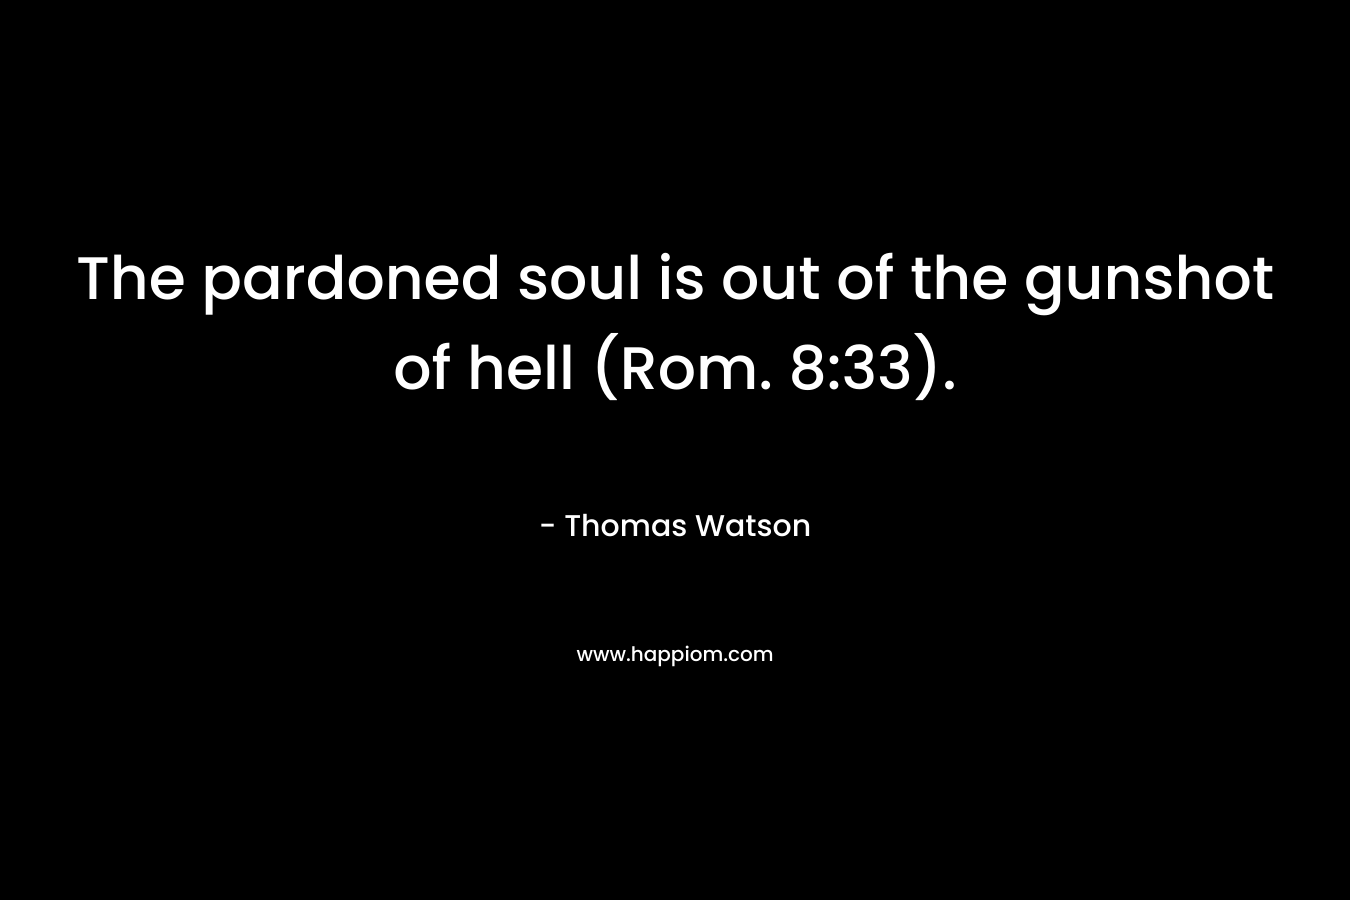 The pardoned soul is out of the gunshot of hell (Rom. 8:33).